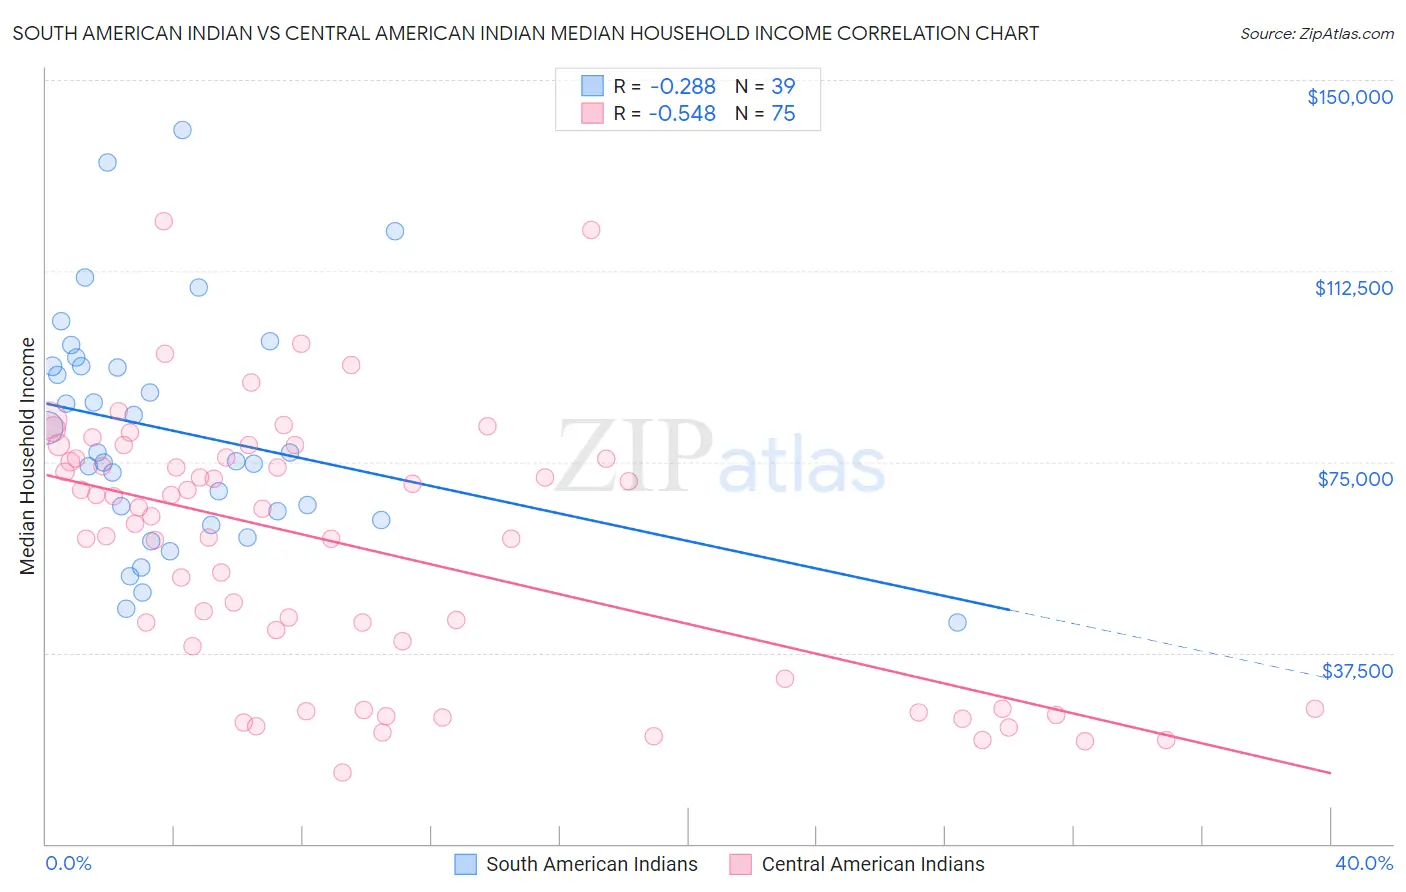 South American Indian vs Central American Indian Median Household Income